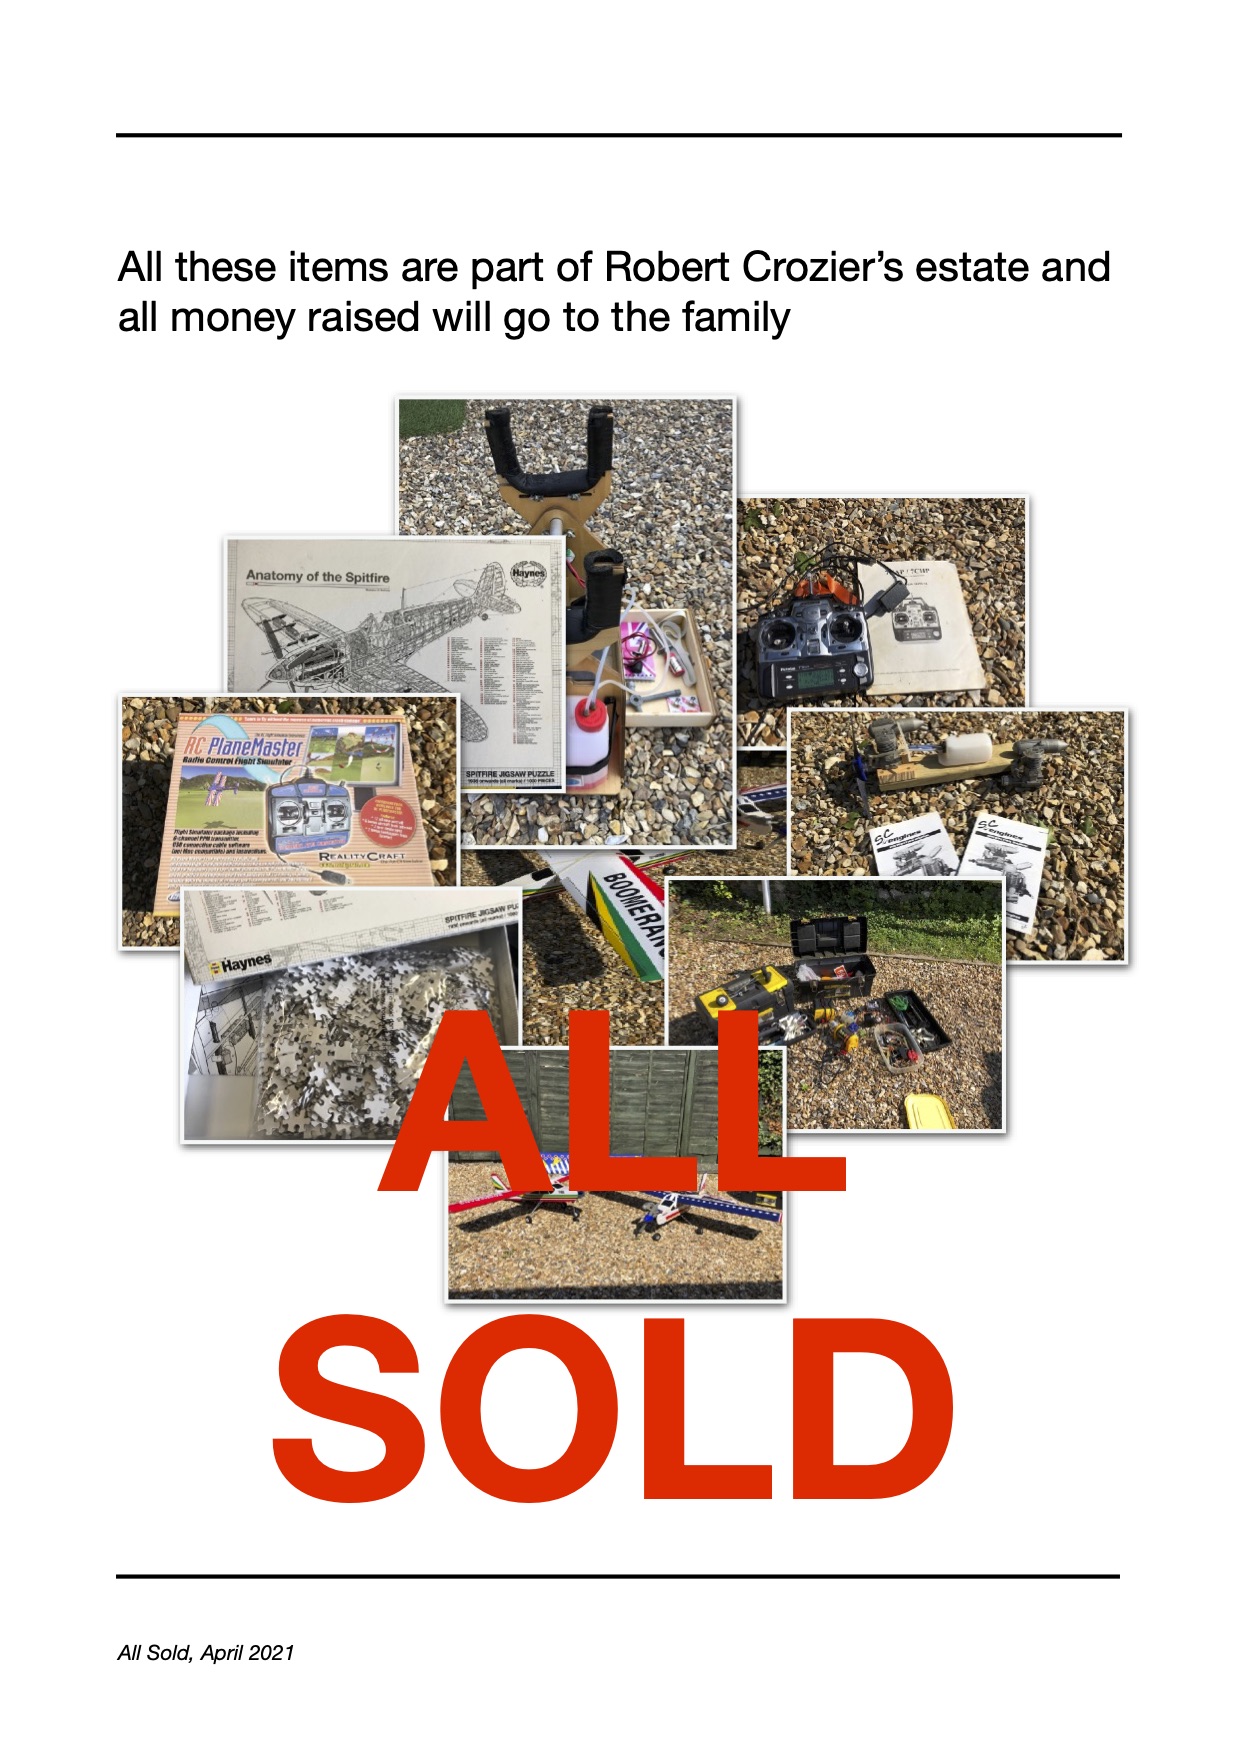 Link to Sale items from Robert Crozier's collection SOLD May 2021